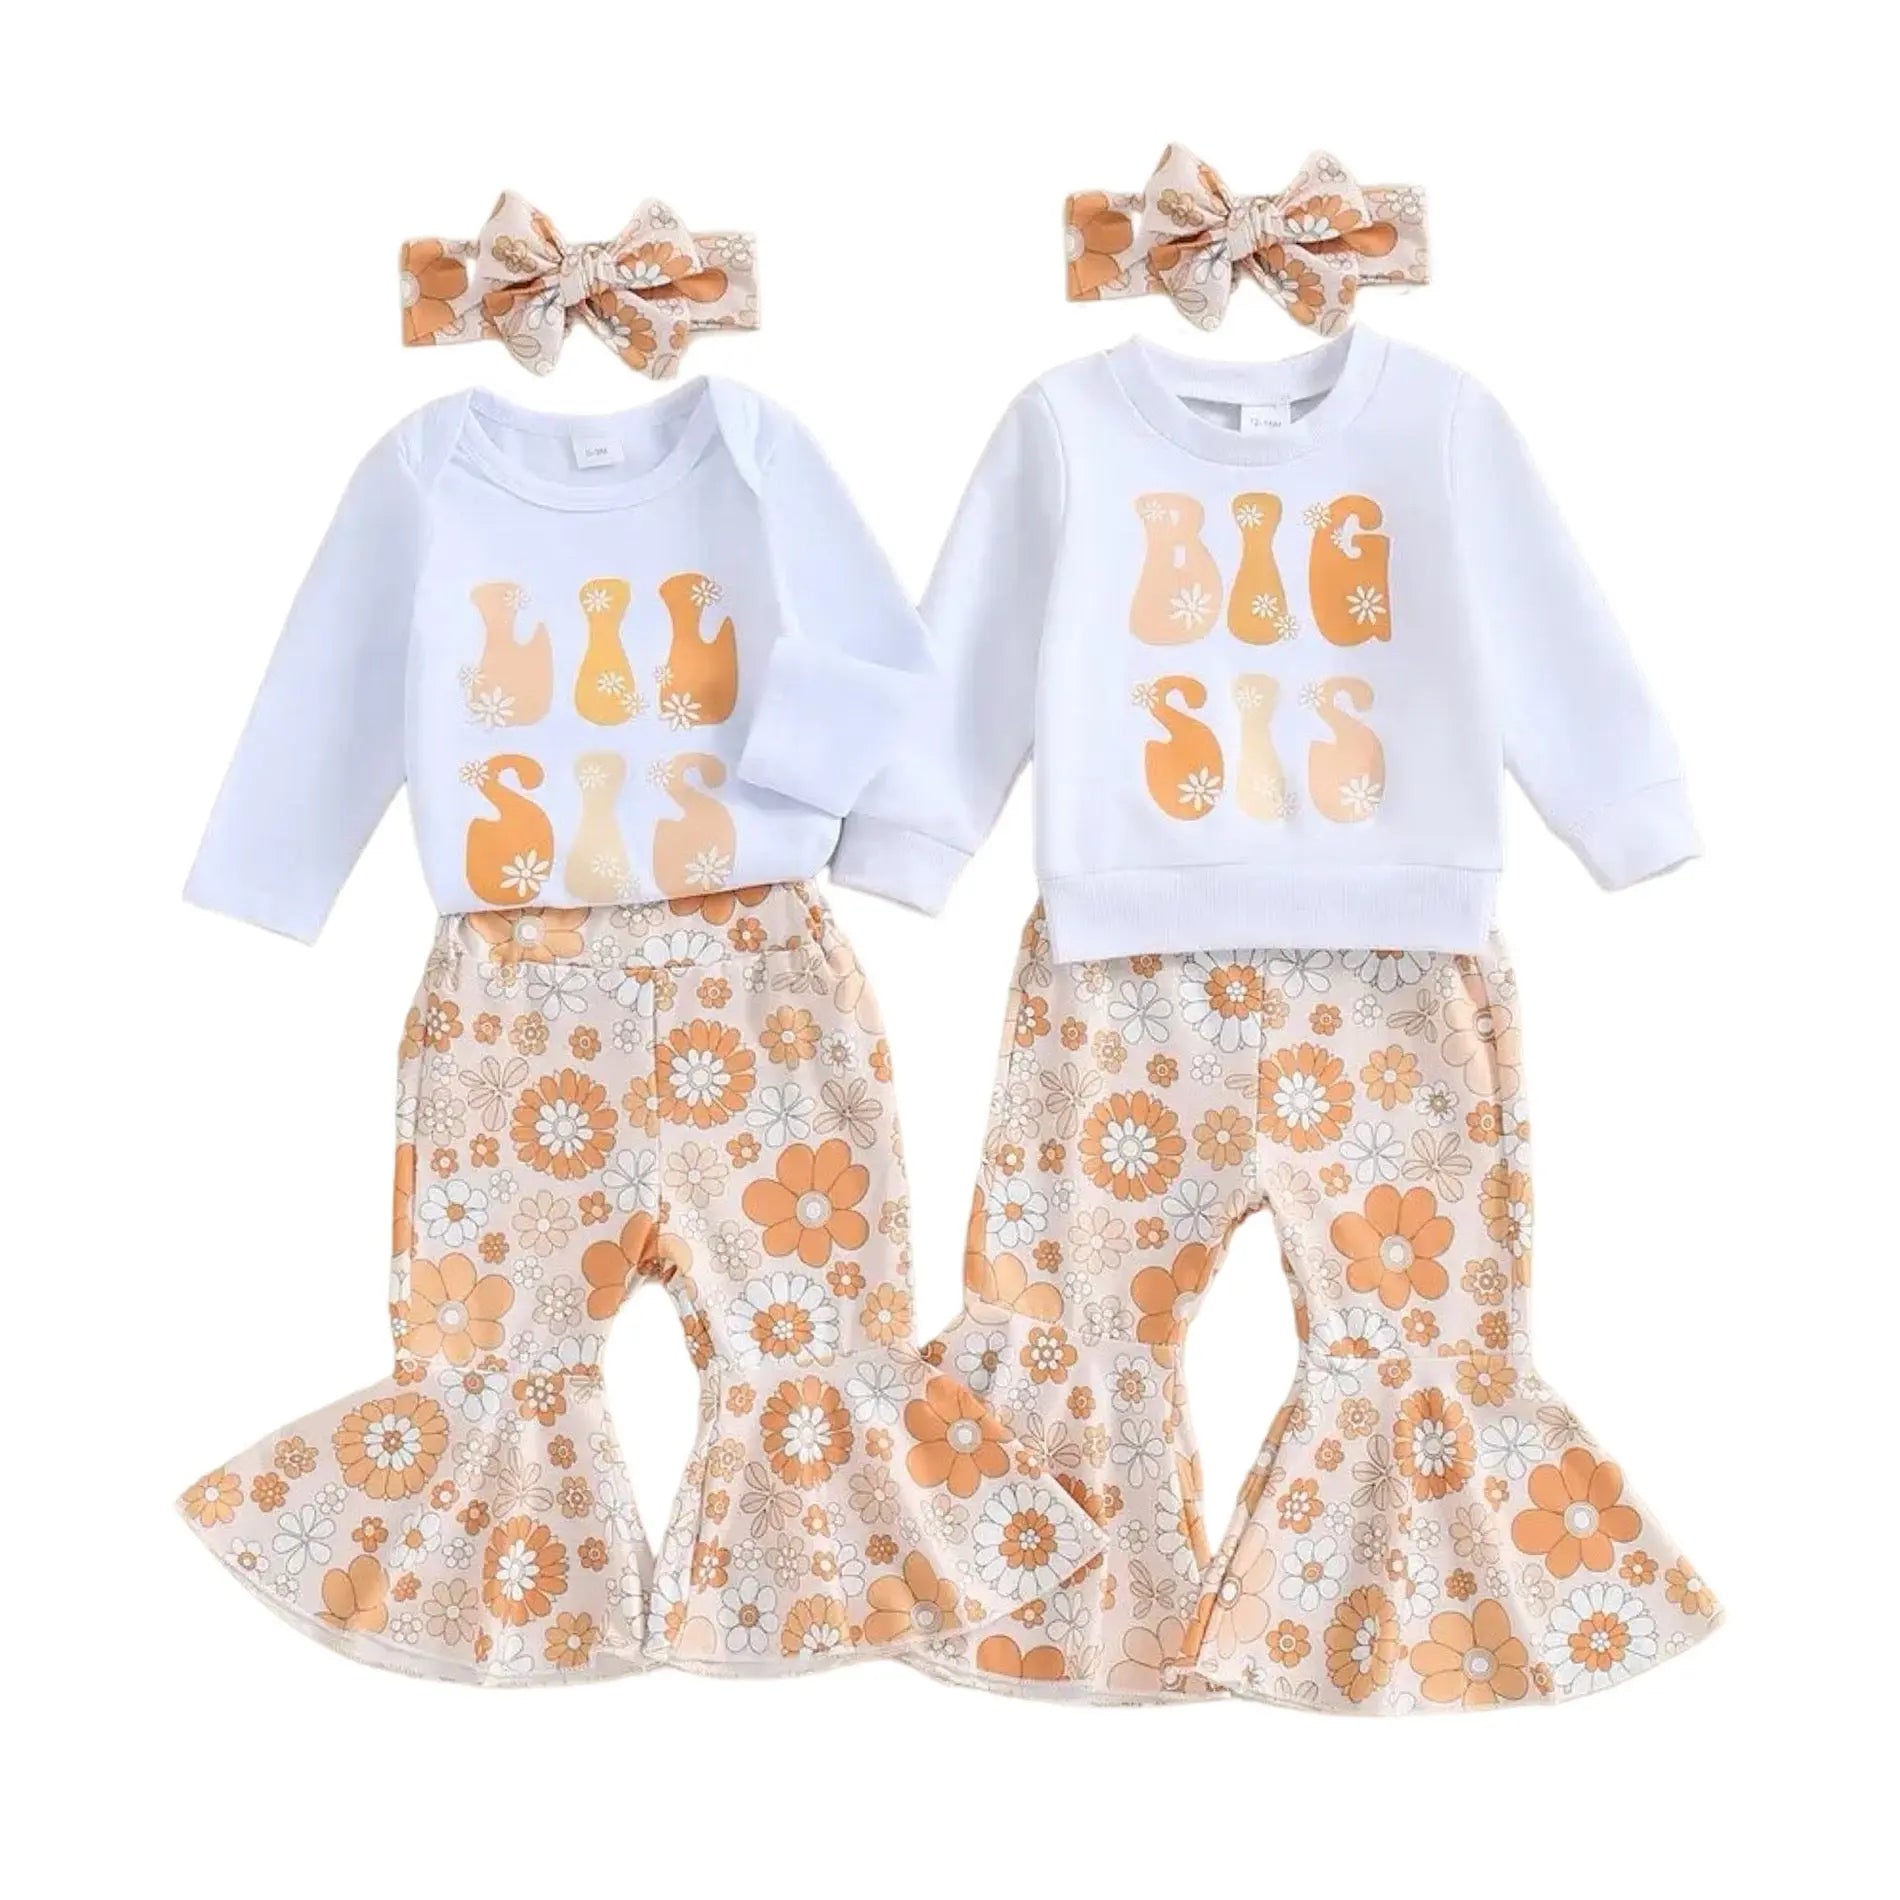 Matching Sister Outfits Baby and Toddler Girls Top and Flare Pants Set Bling Bling Baby Boutique